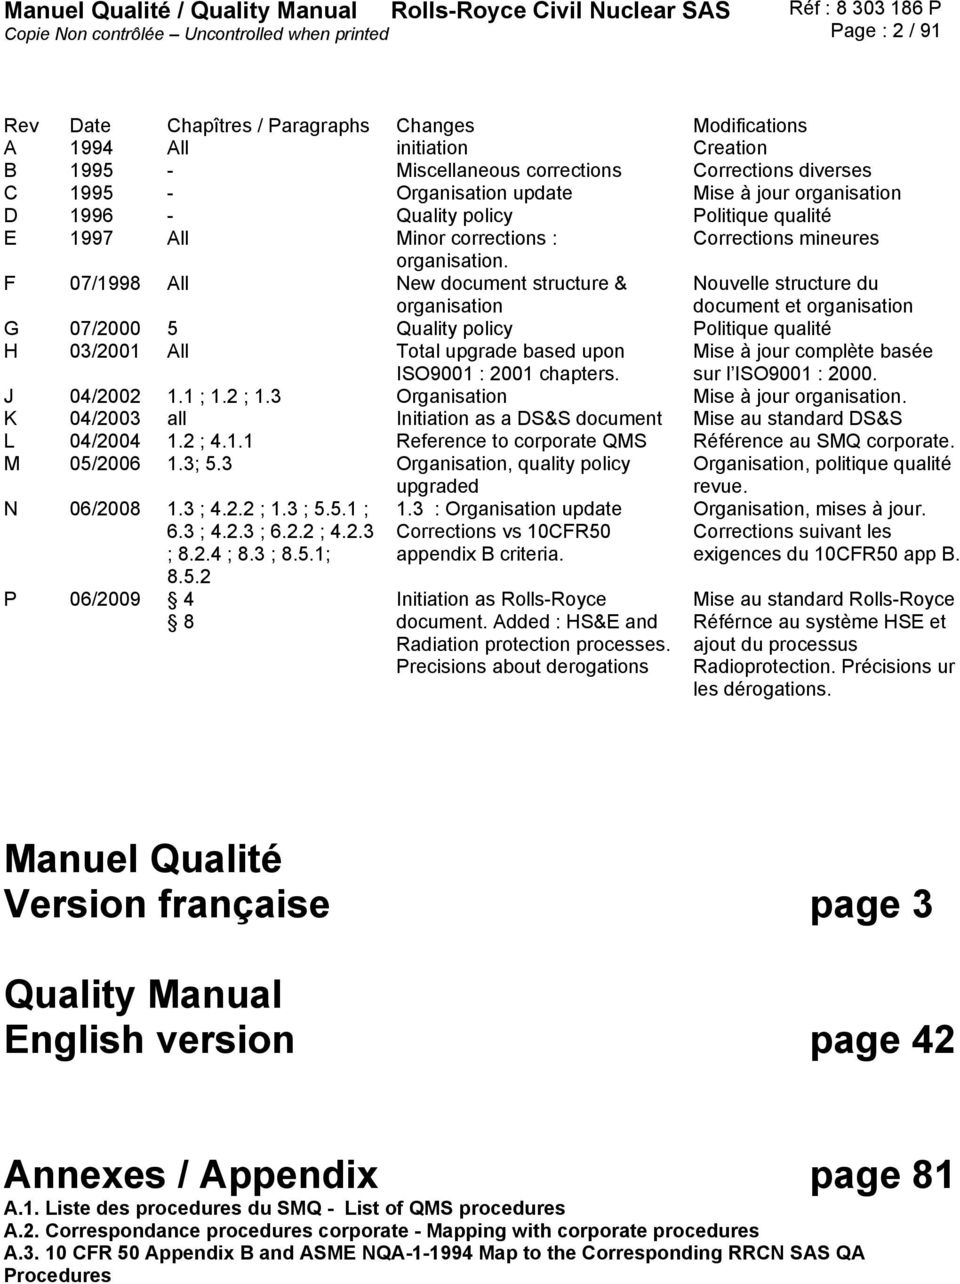 F 07/1998 All New document structure & organisation Nouvelle structure du document et organisation G 07/2000 5 Quality policy Politique qualité H 03/2001 All Total upgrade based upon ISO9001 : 2001